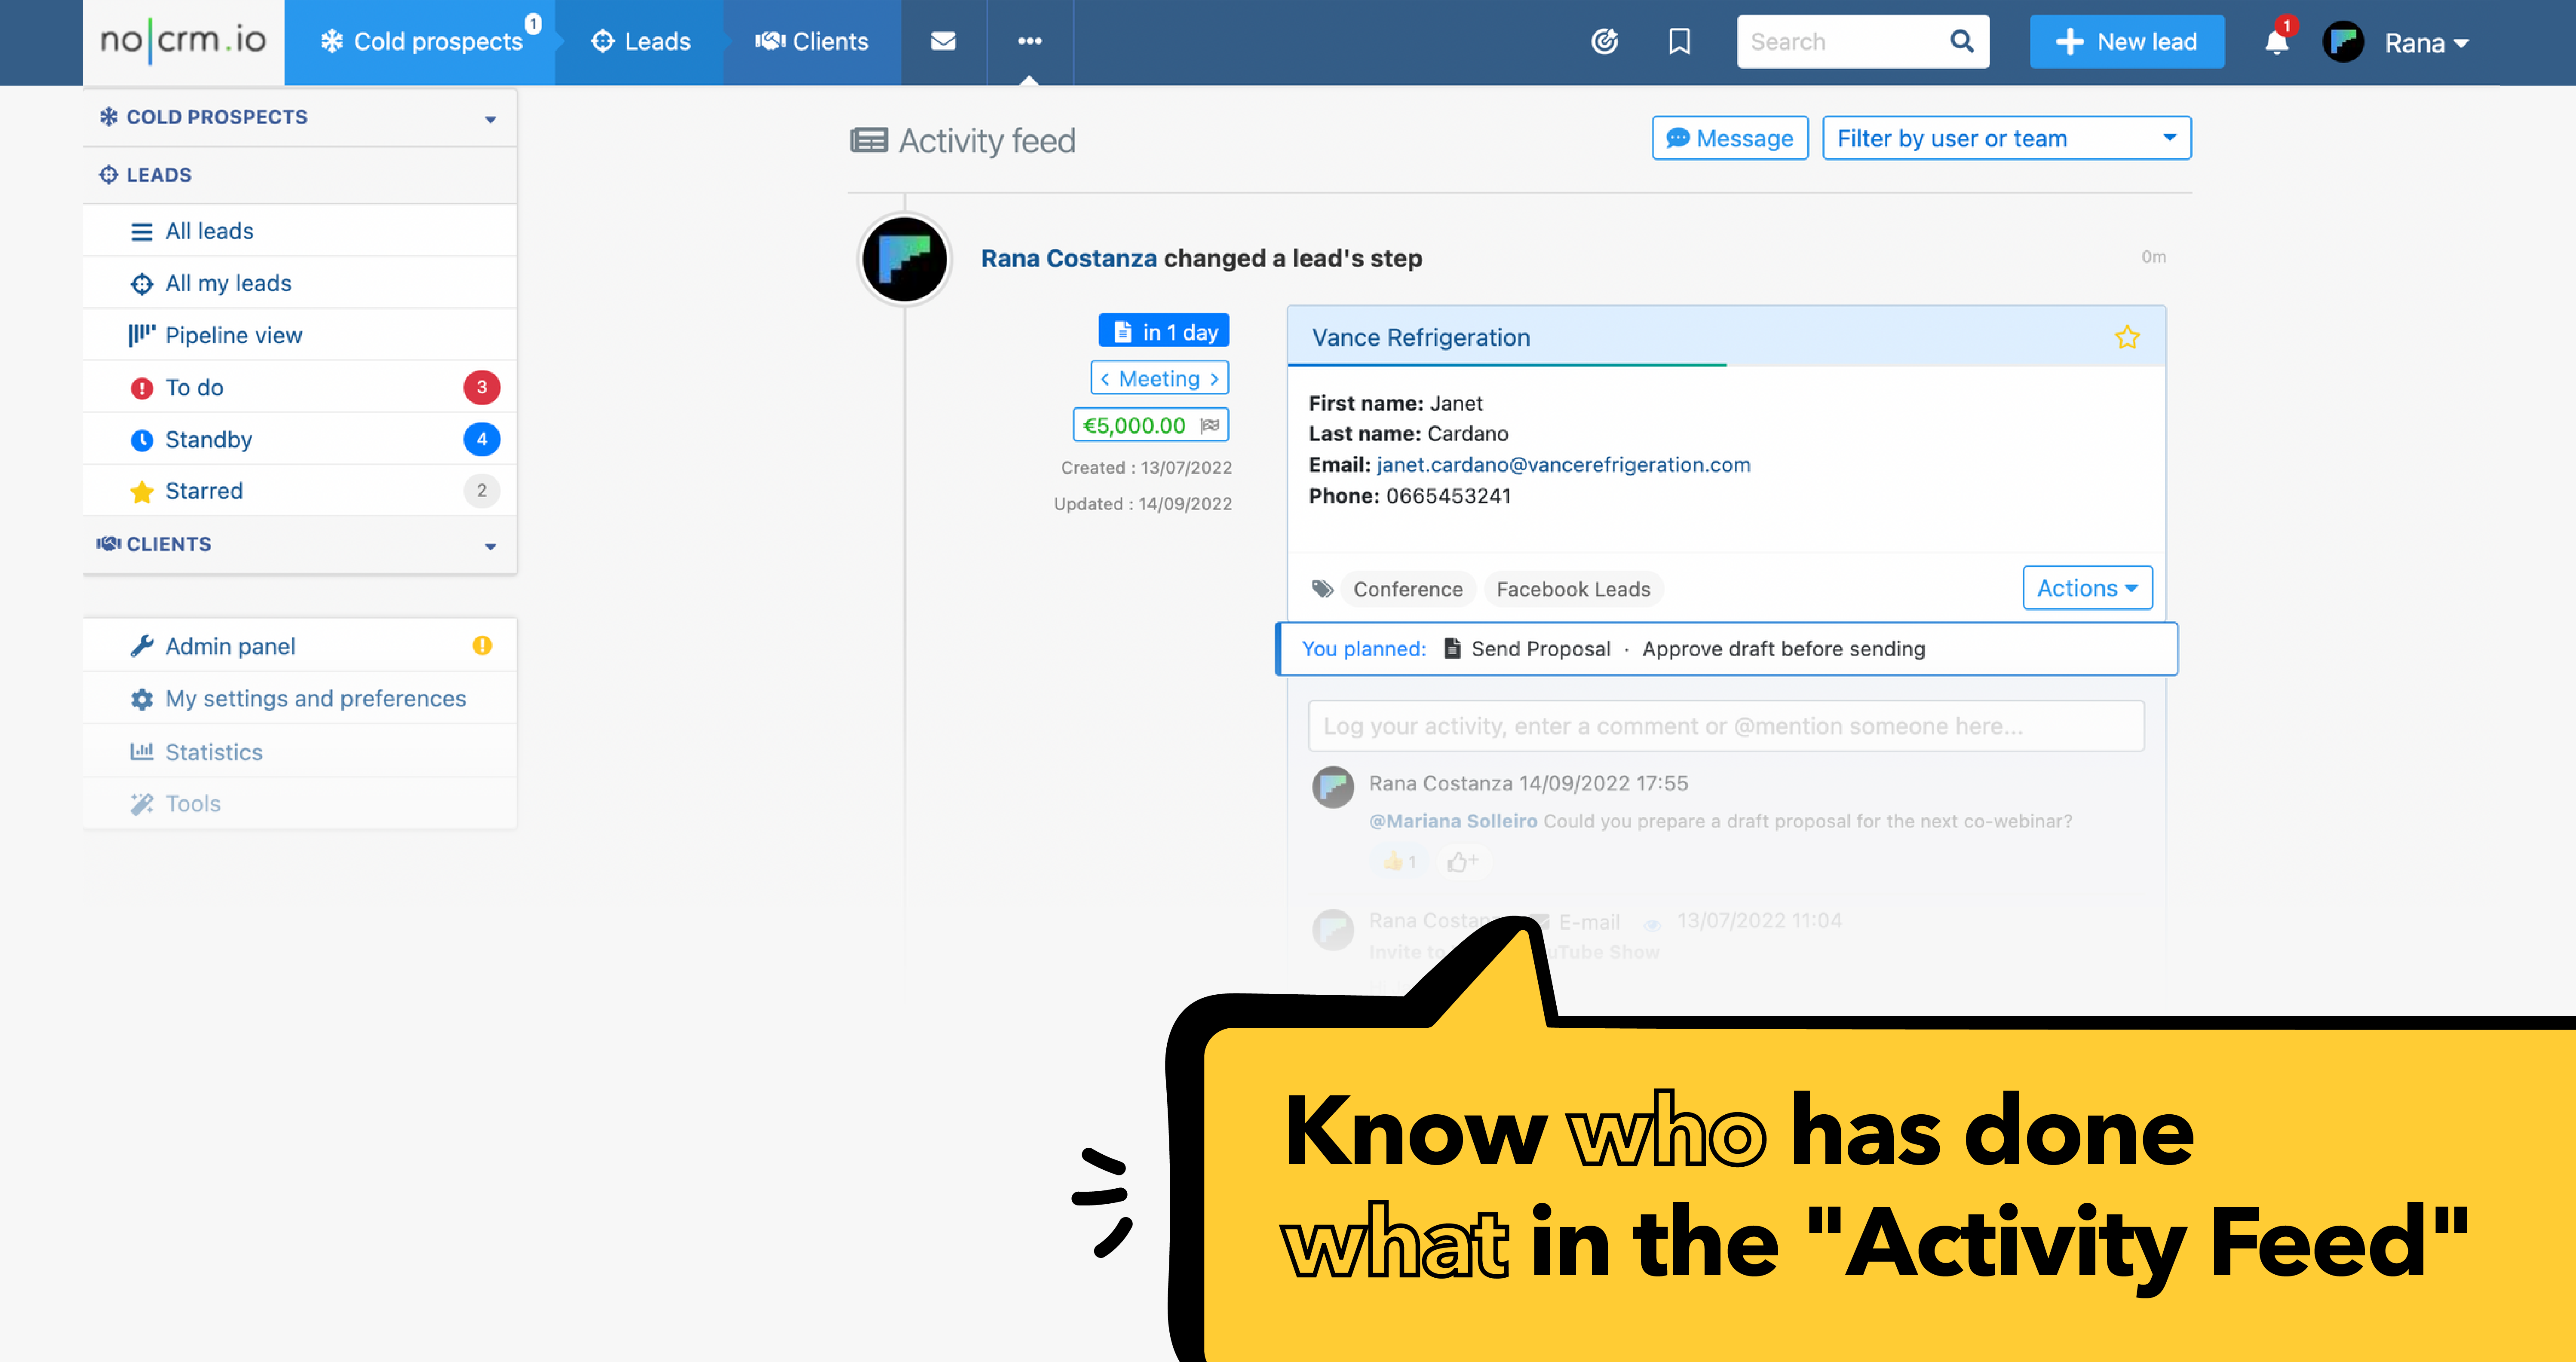 noCRM.io Software - Follow your team's activity in the Activity Feed